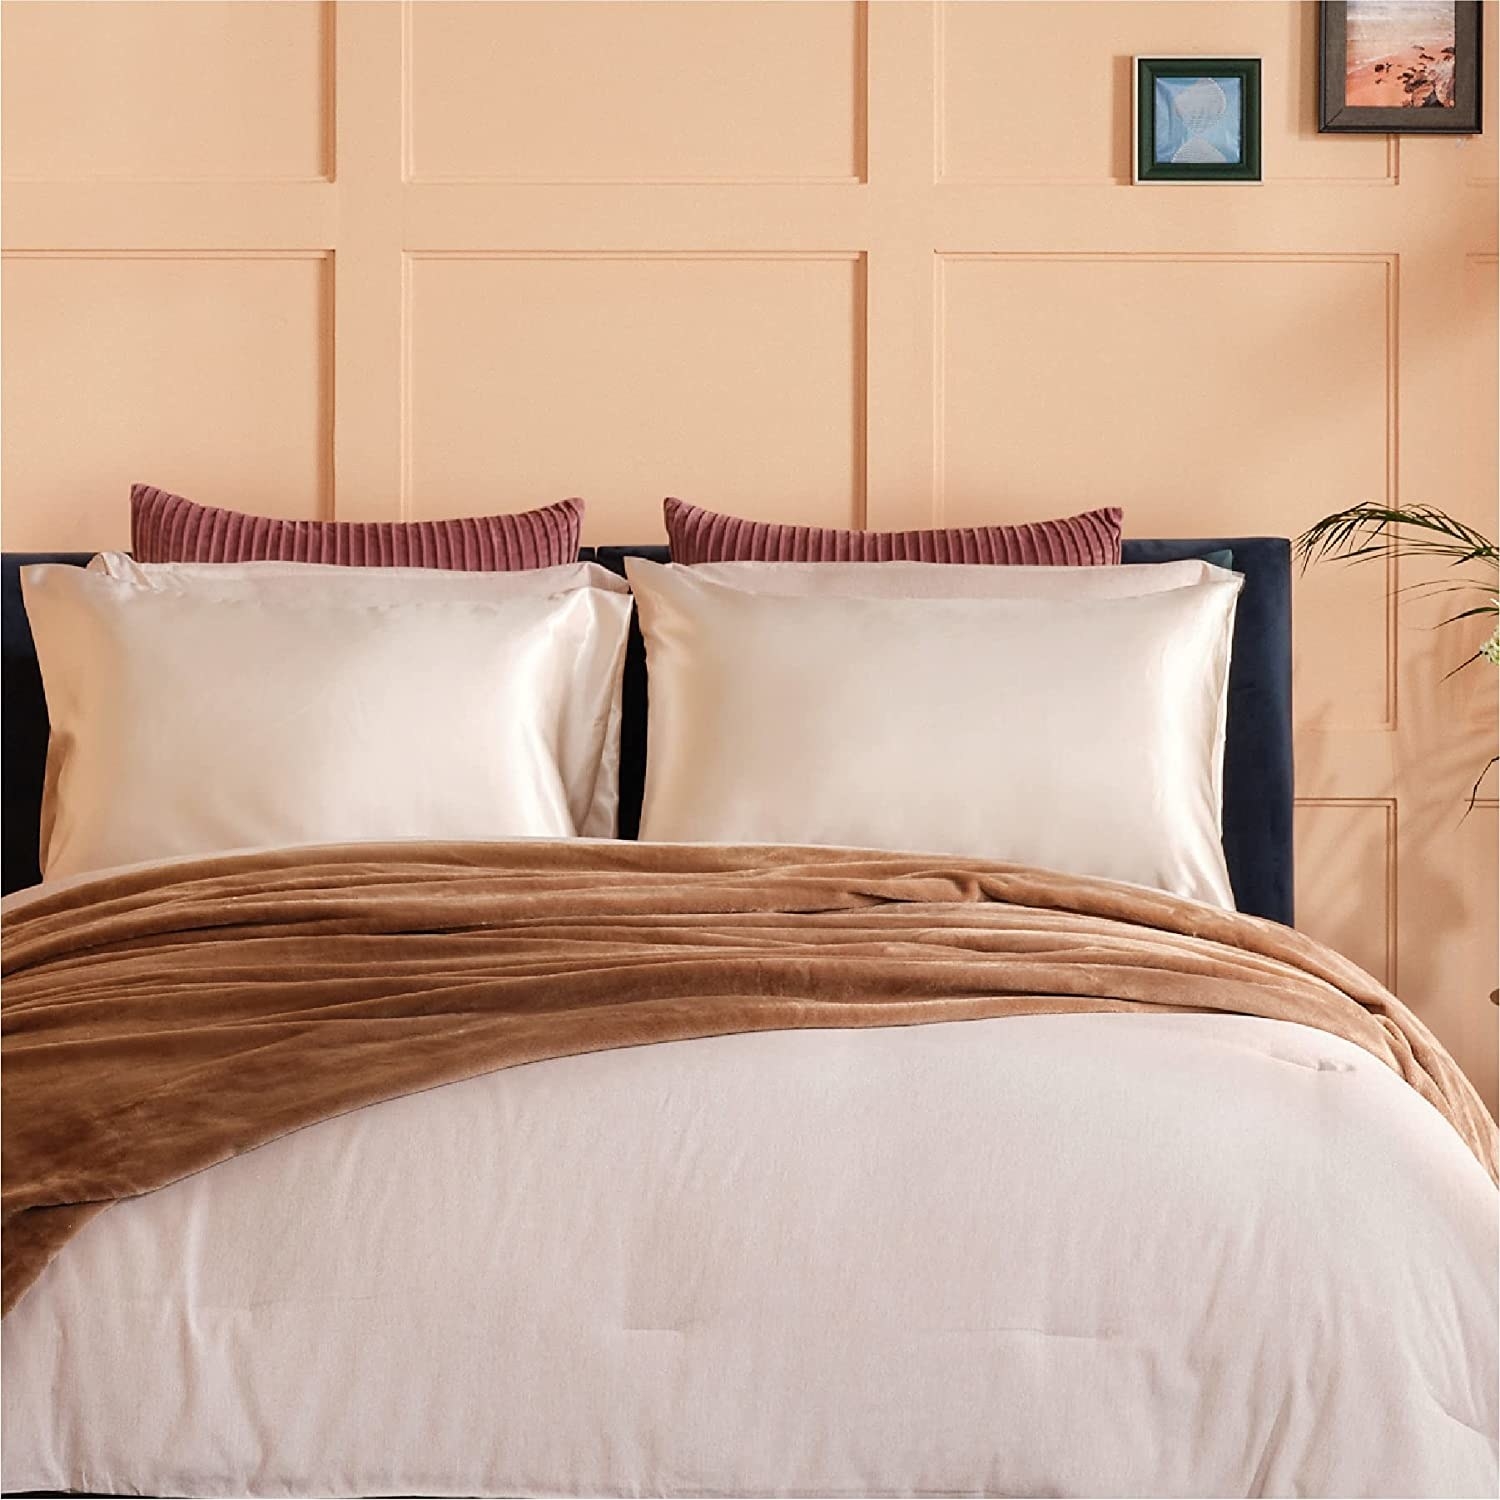 Stock photo of a bed with cream satin pillows on them